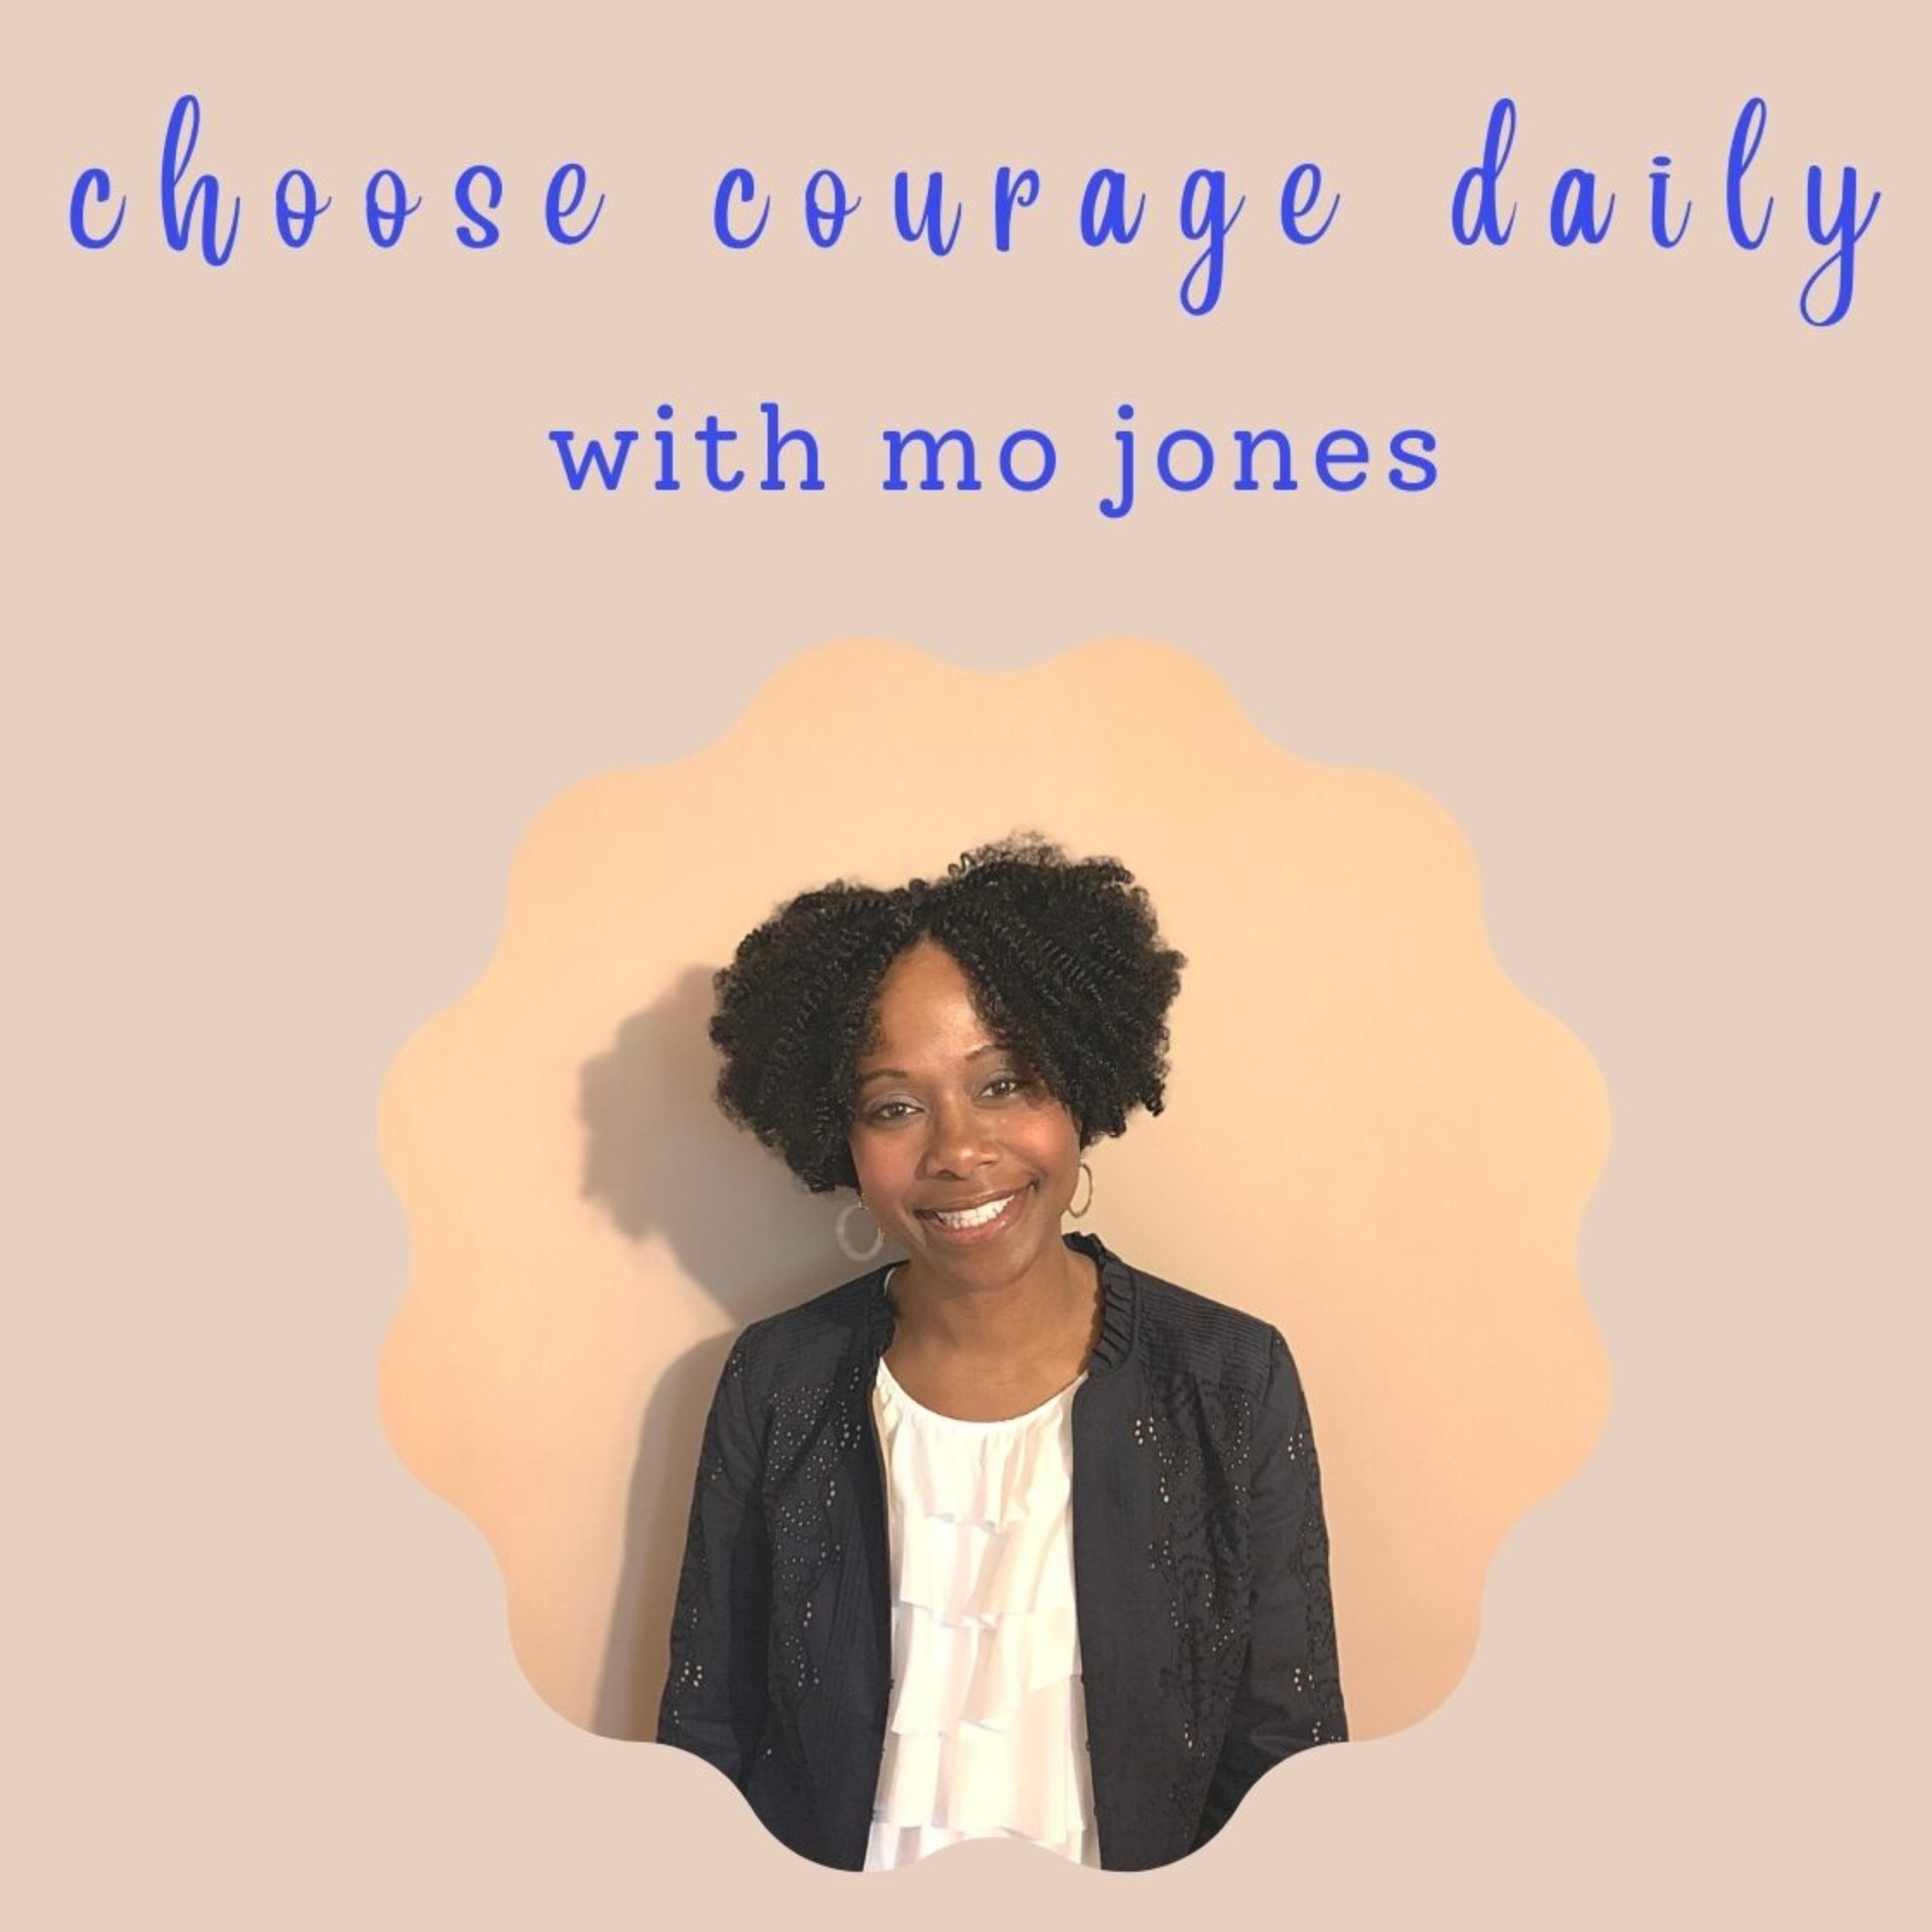 choose courage daily